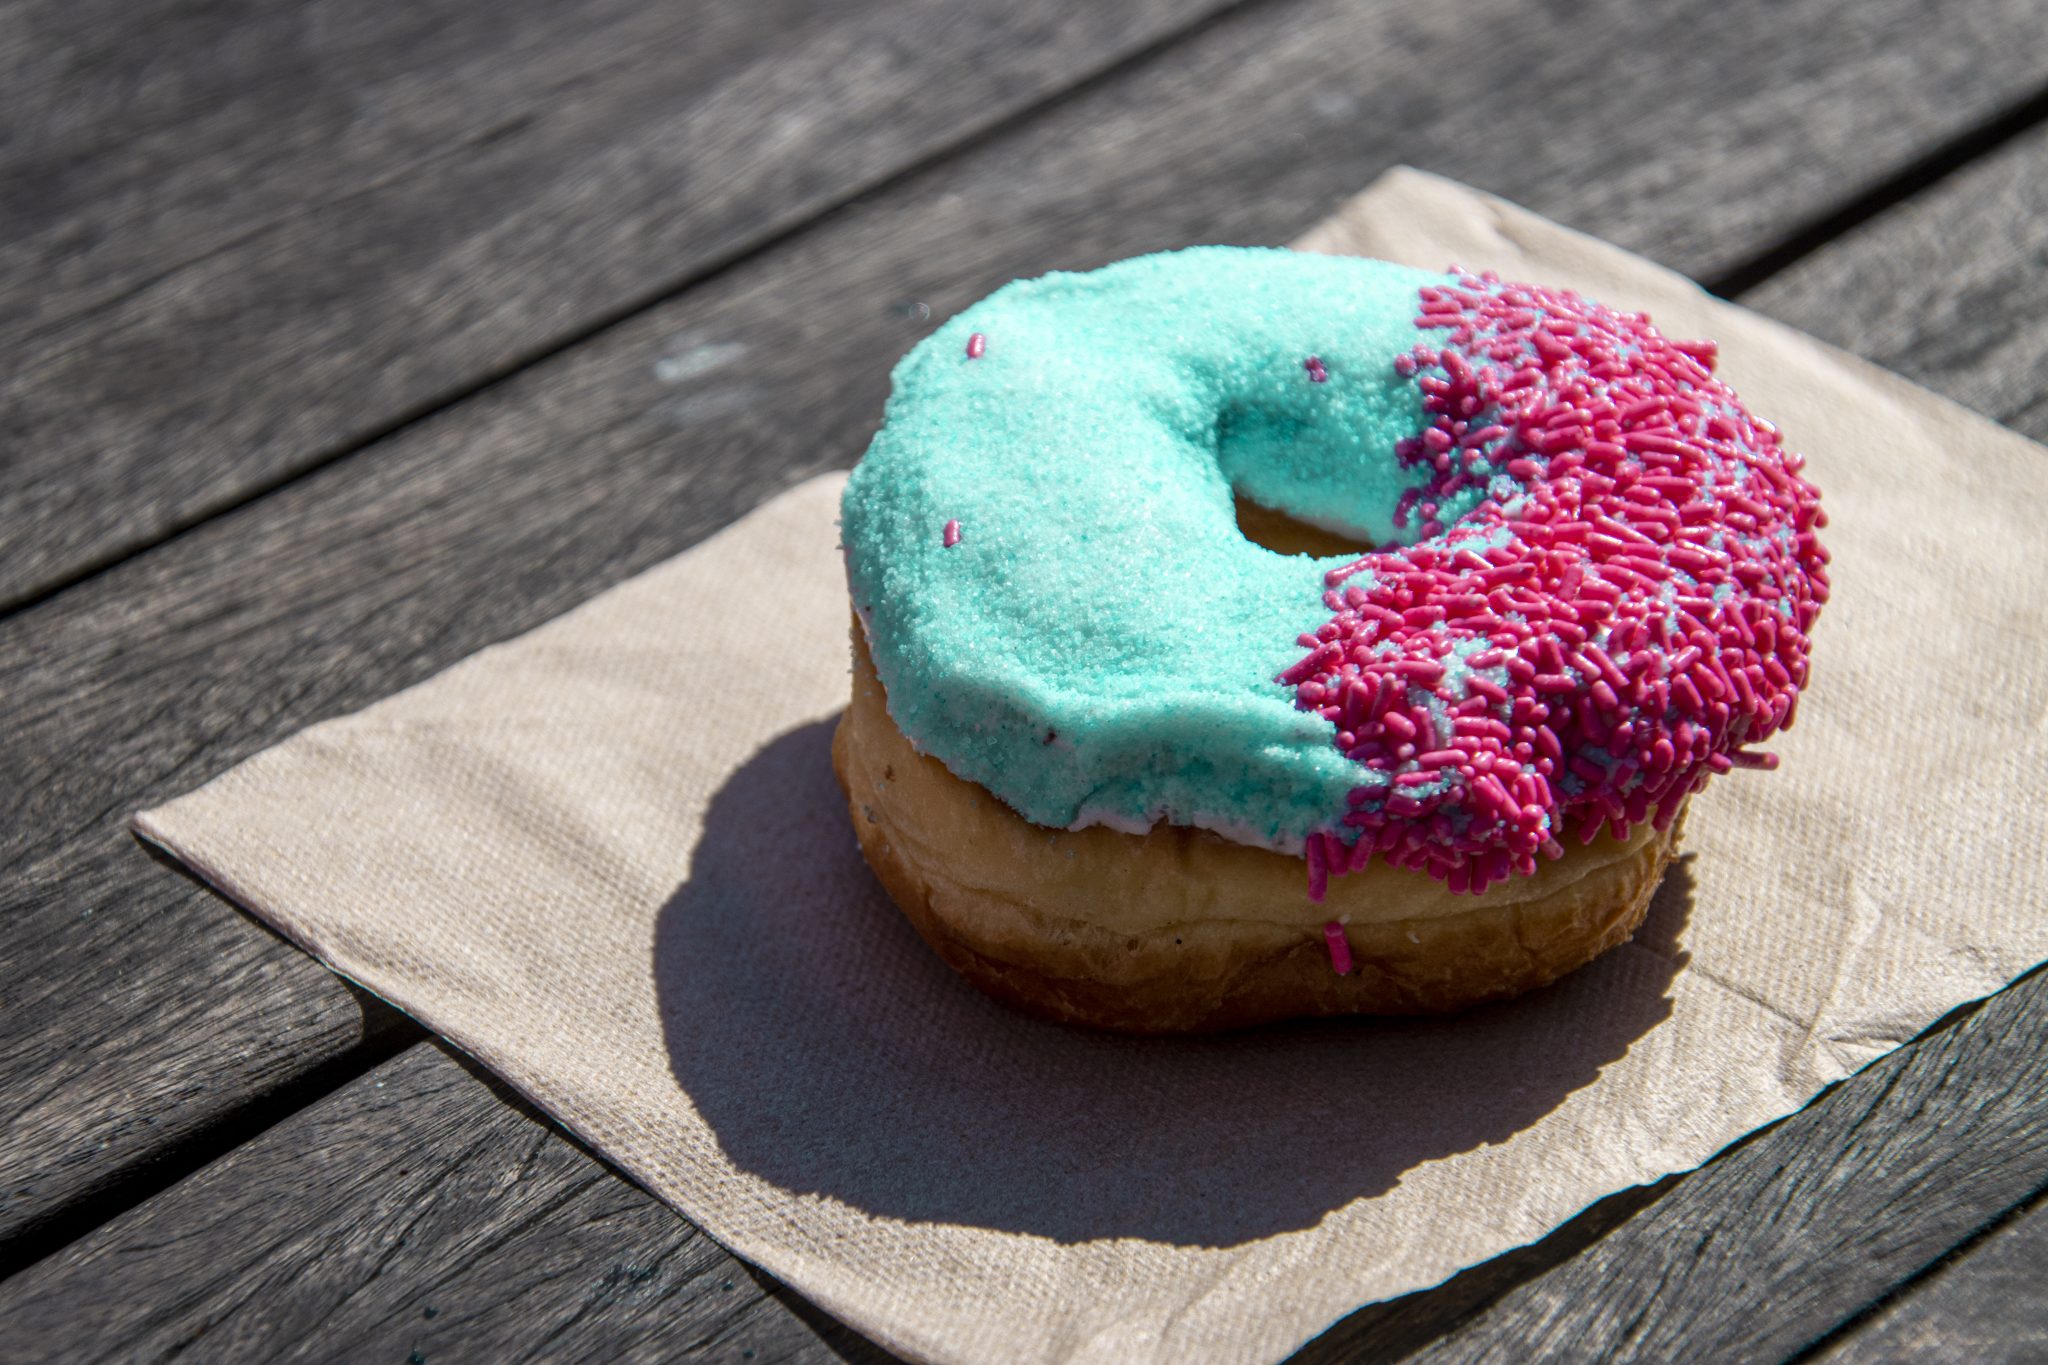 Donut with mint colored frosting and pink sprinkles